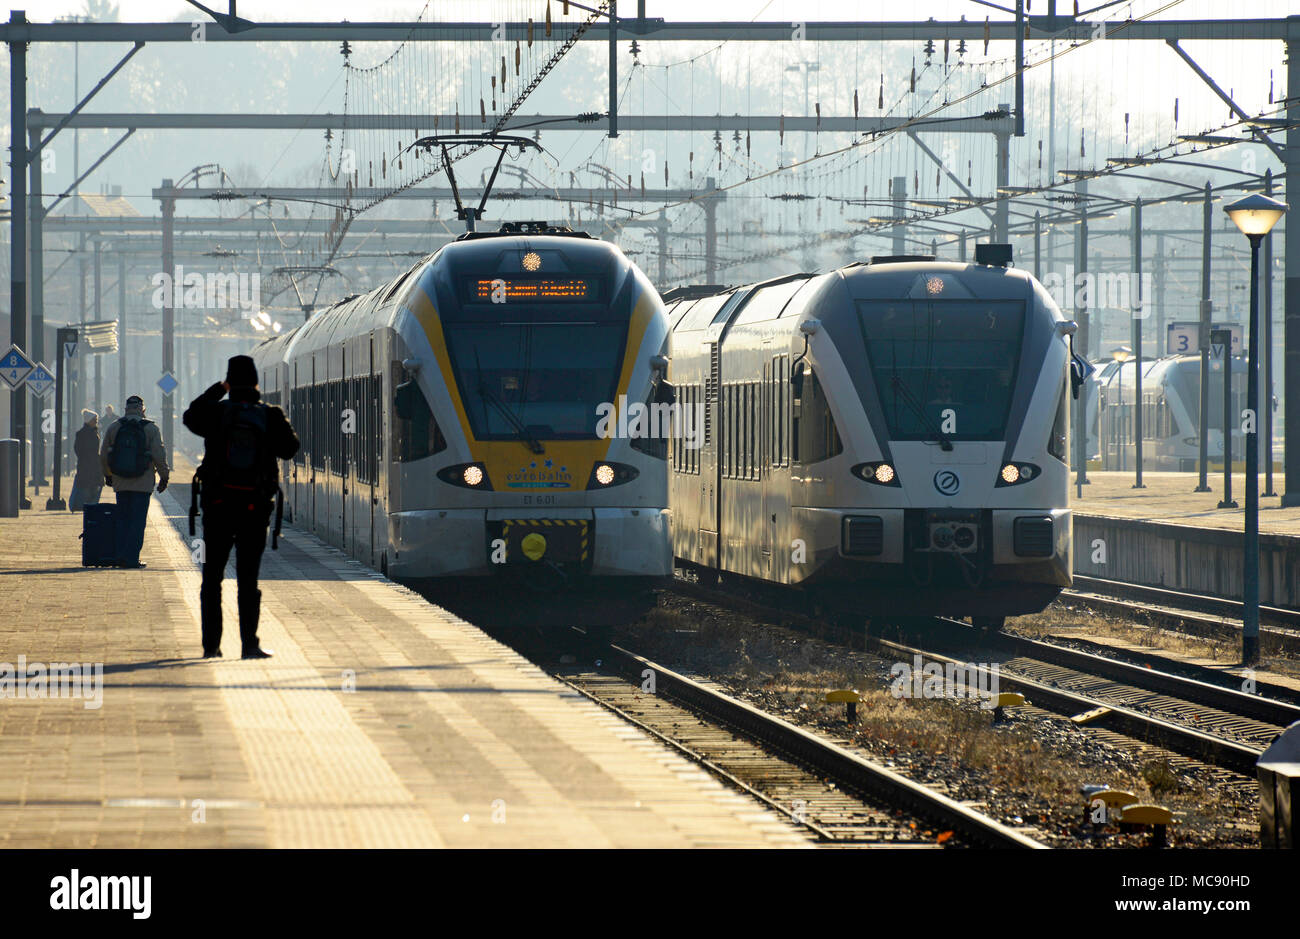 A train from Germany approaches Venlo in the Netherlands as another waits at the station platform to depart Stock Photo